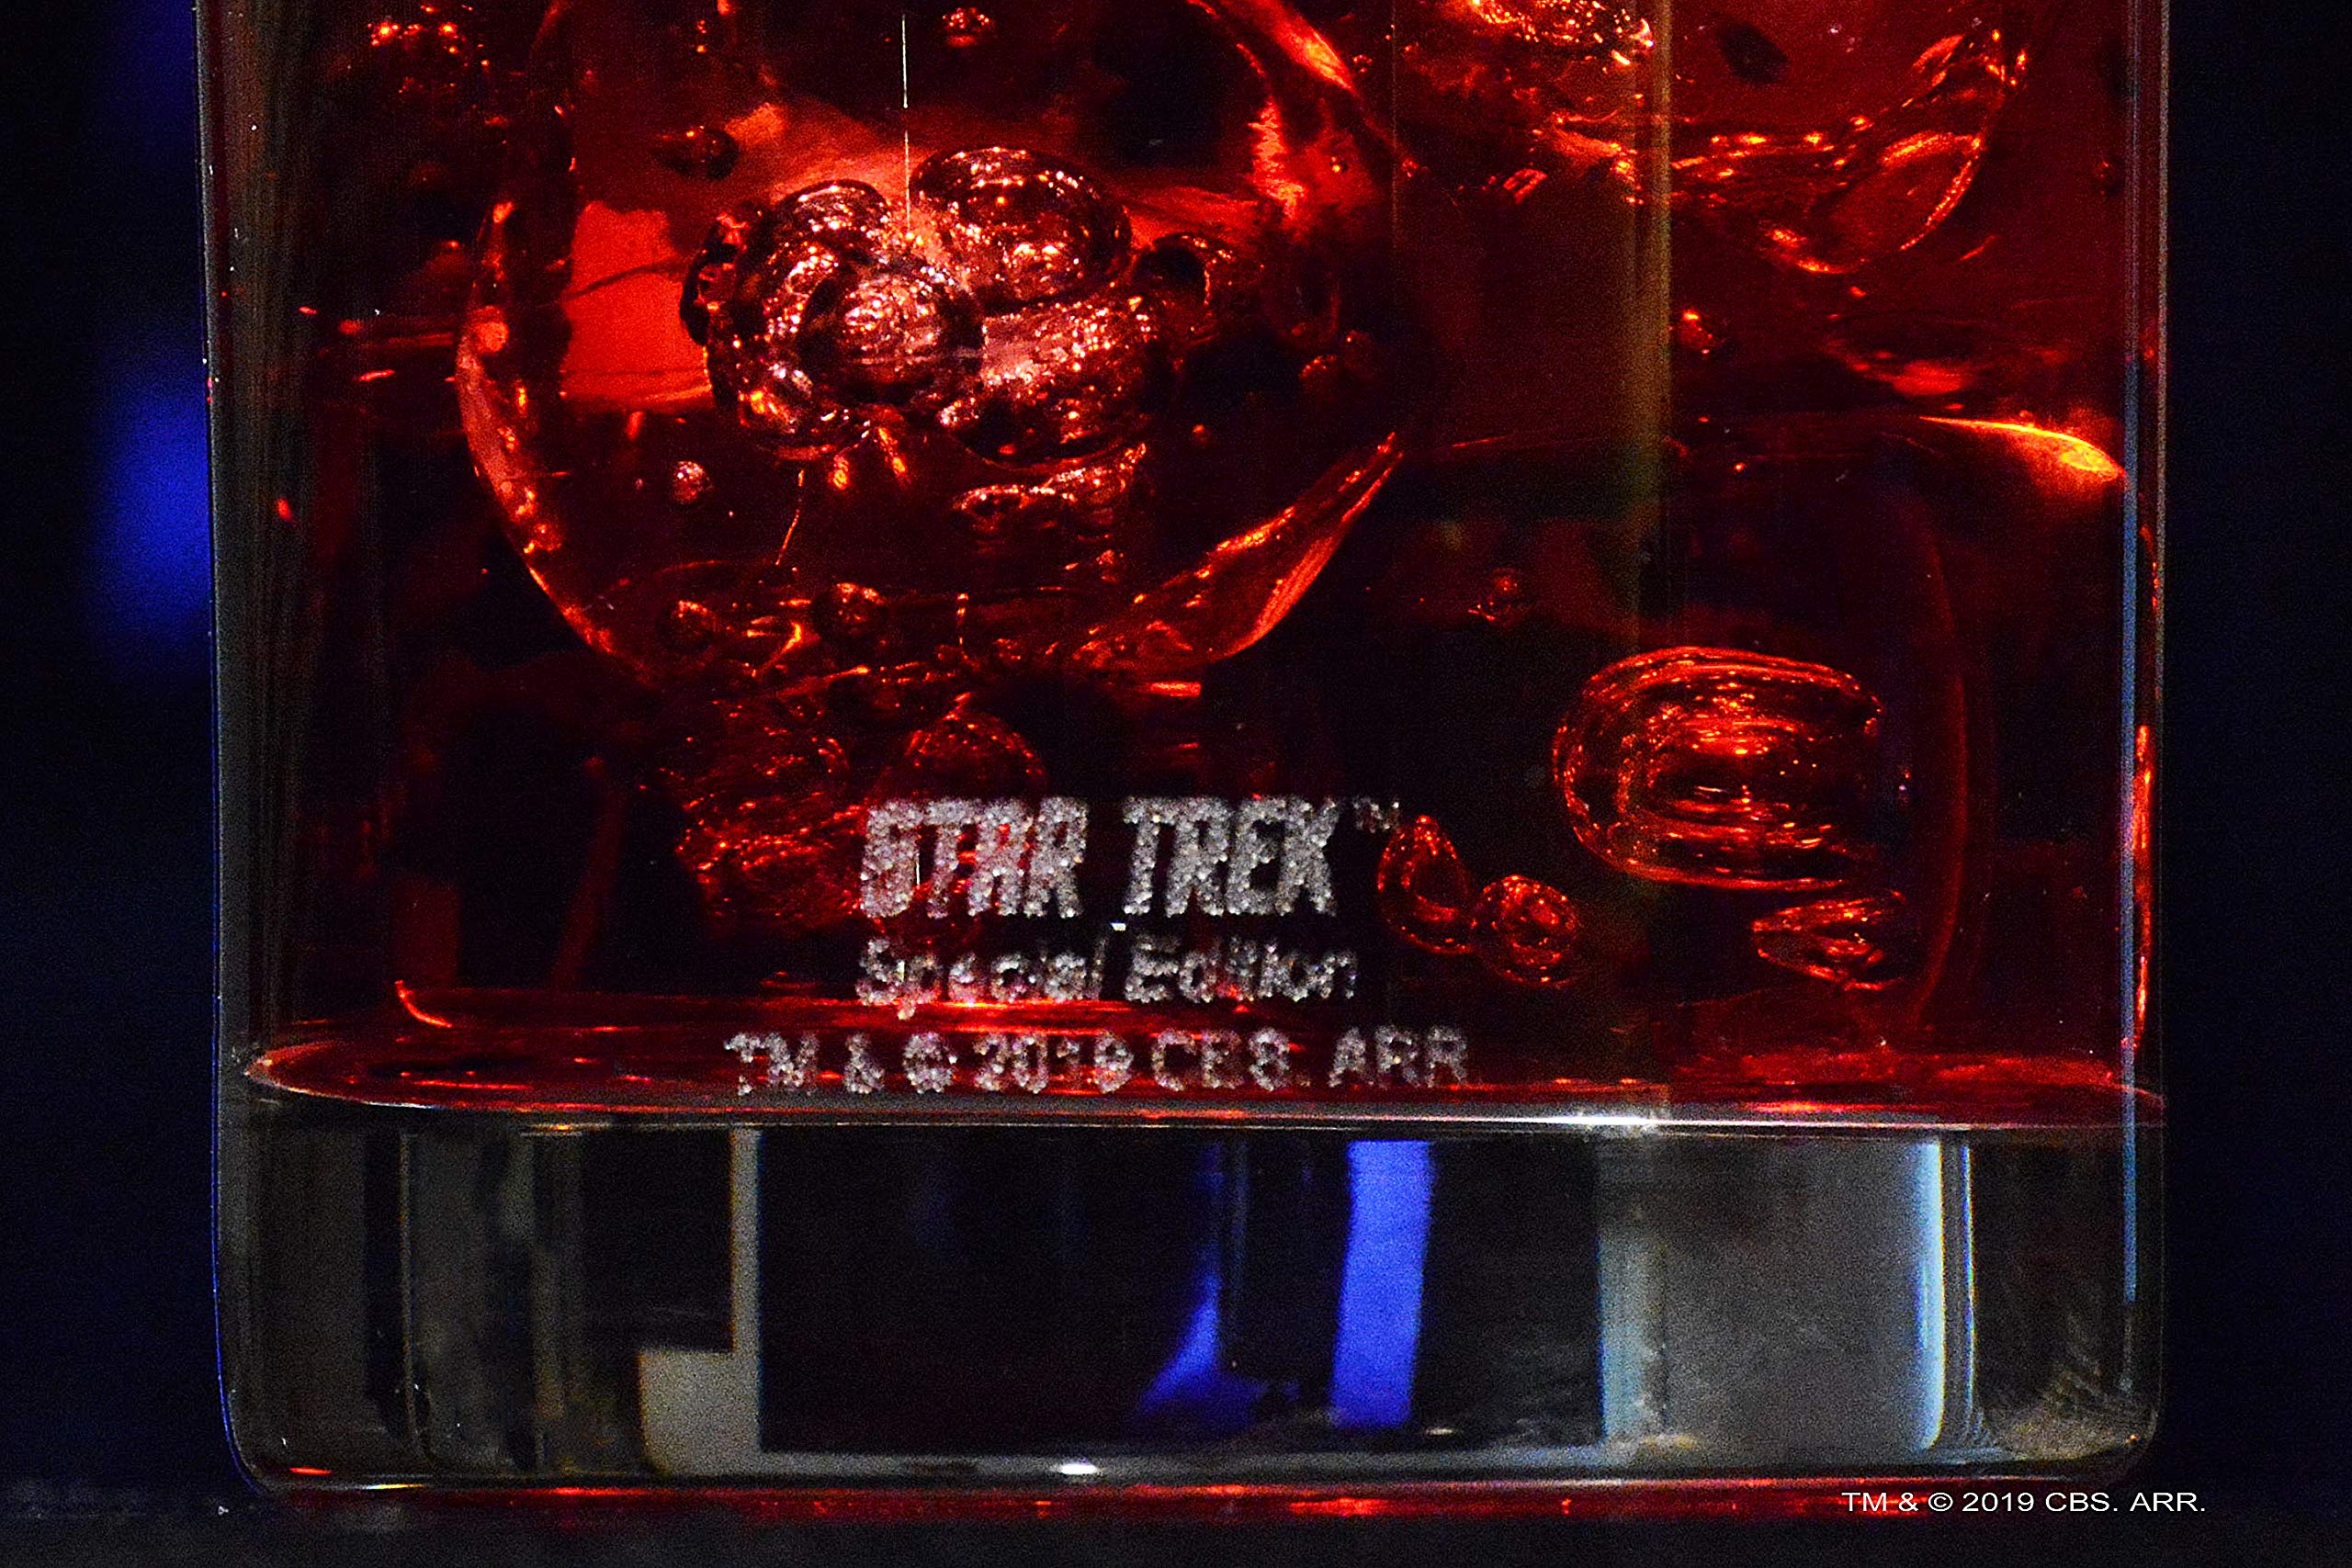 STAR TREK Property of Discovery Etched Whiskey Glass - Officially Licensed, Premium Quality, Handcrafted Glassware, 11 oz. Rocks Glass - Perfect Collectible Gift for Series Lovers & Special Occasions